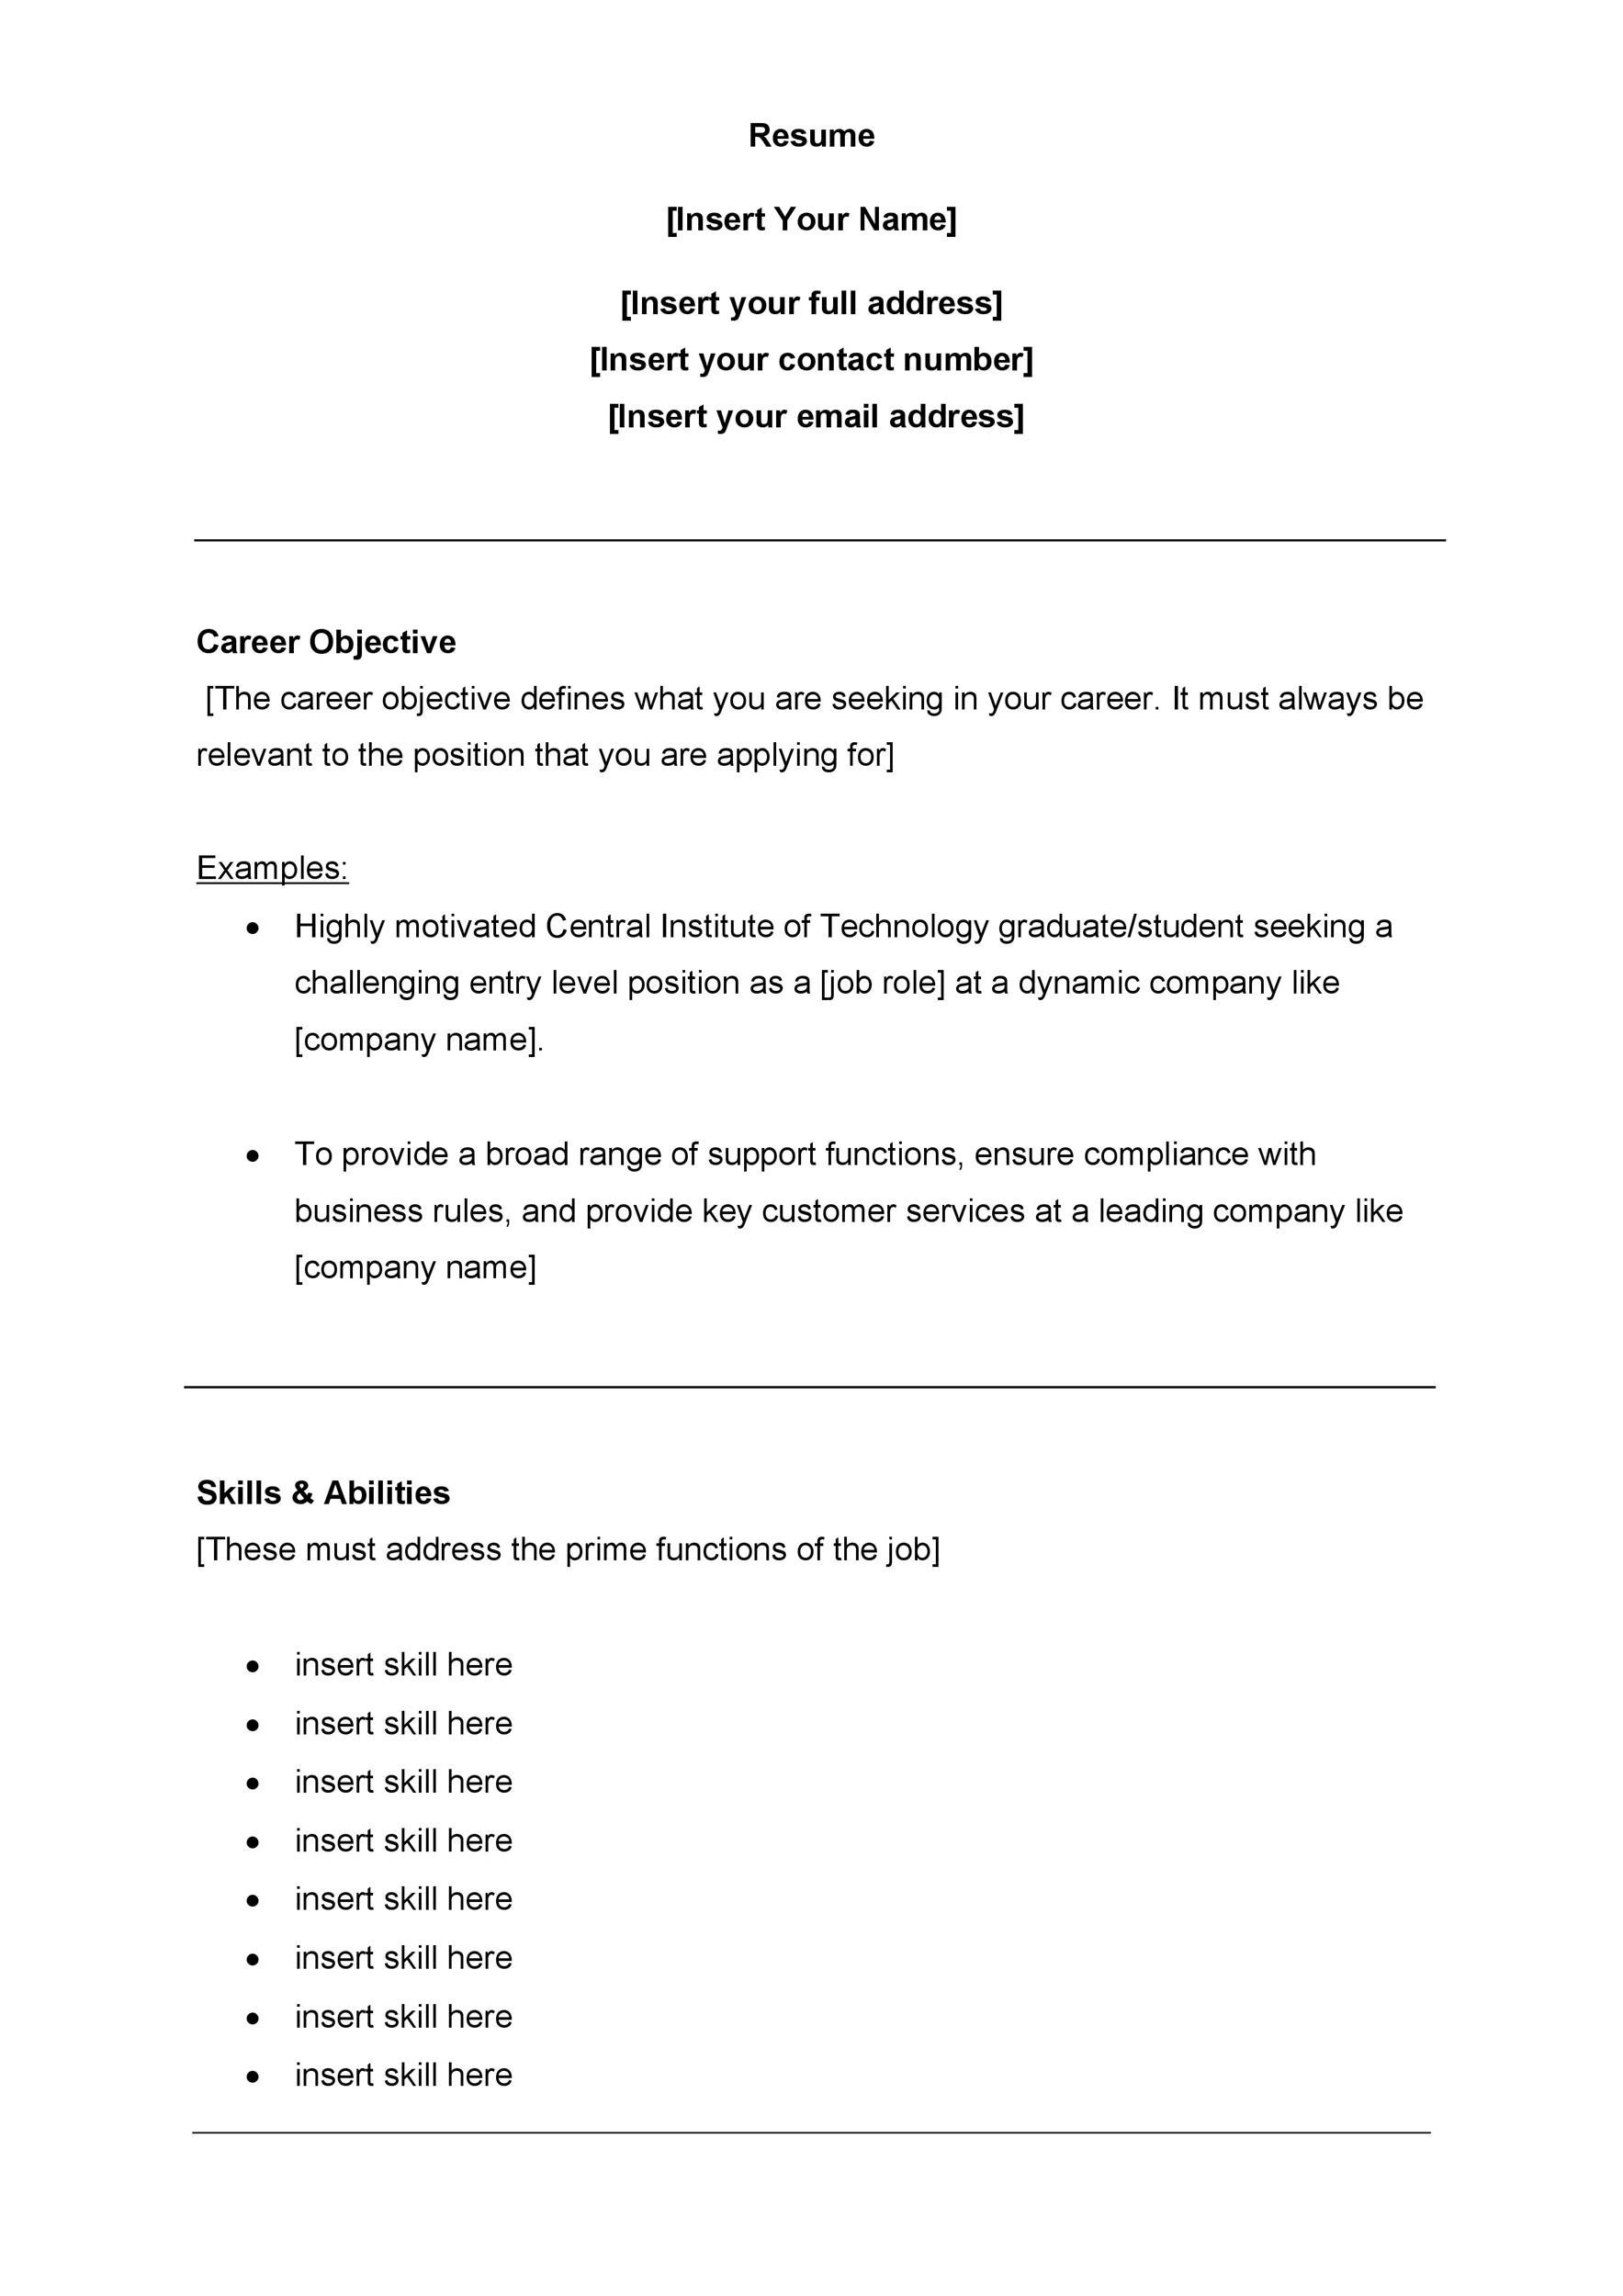 Free Resume Templates for Customer Service Jobs 30lancarrezekiq Customer Service Resume Examples á Templatelab